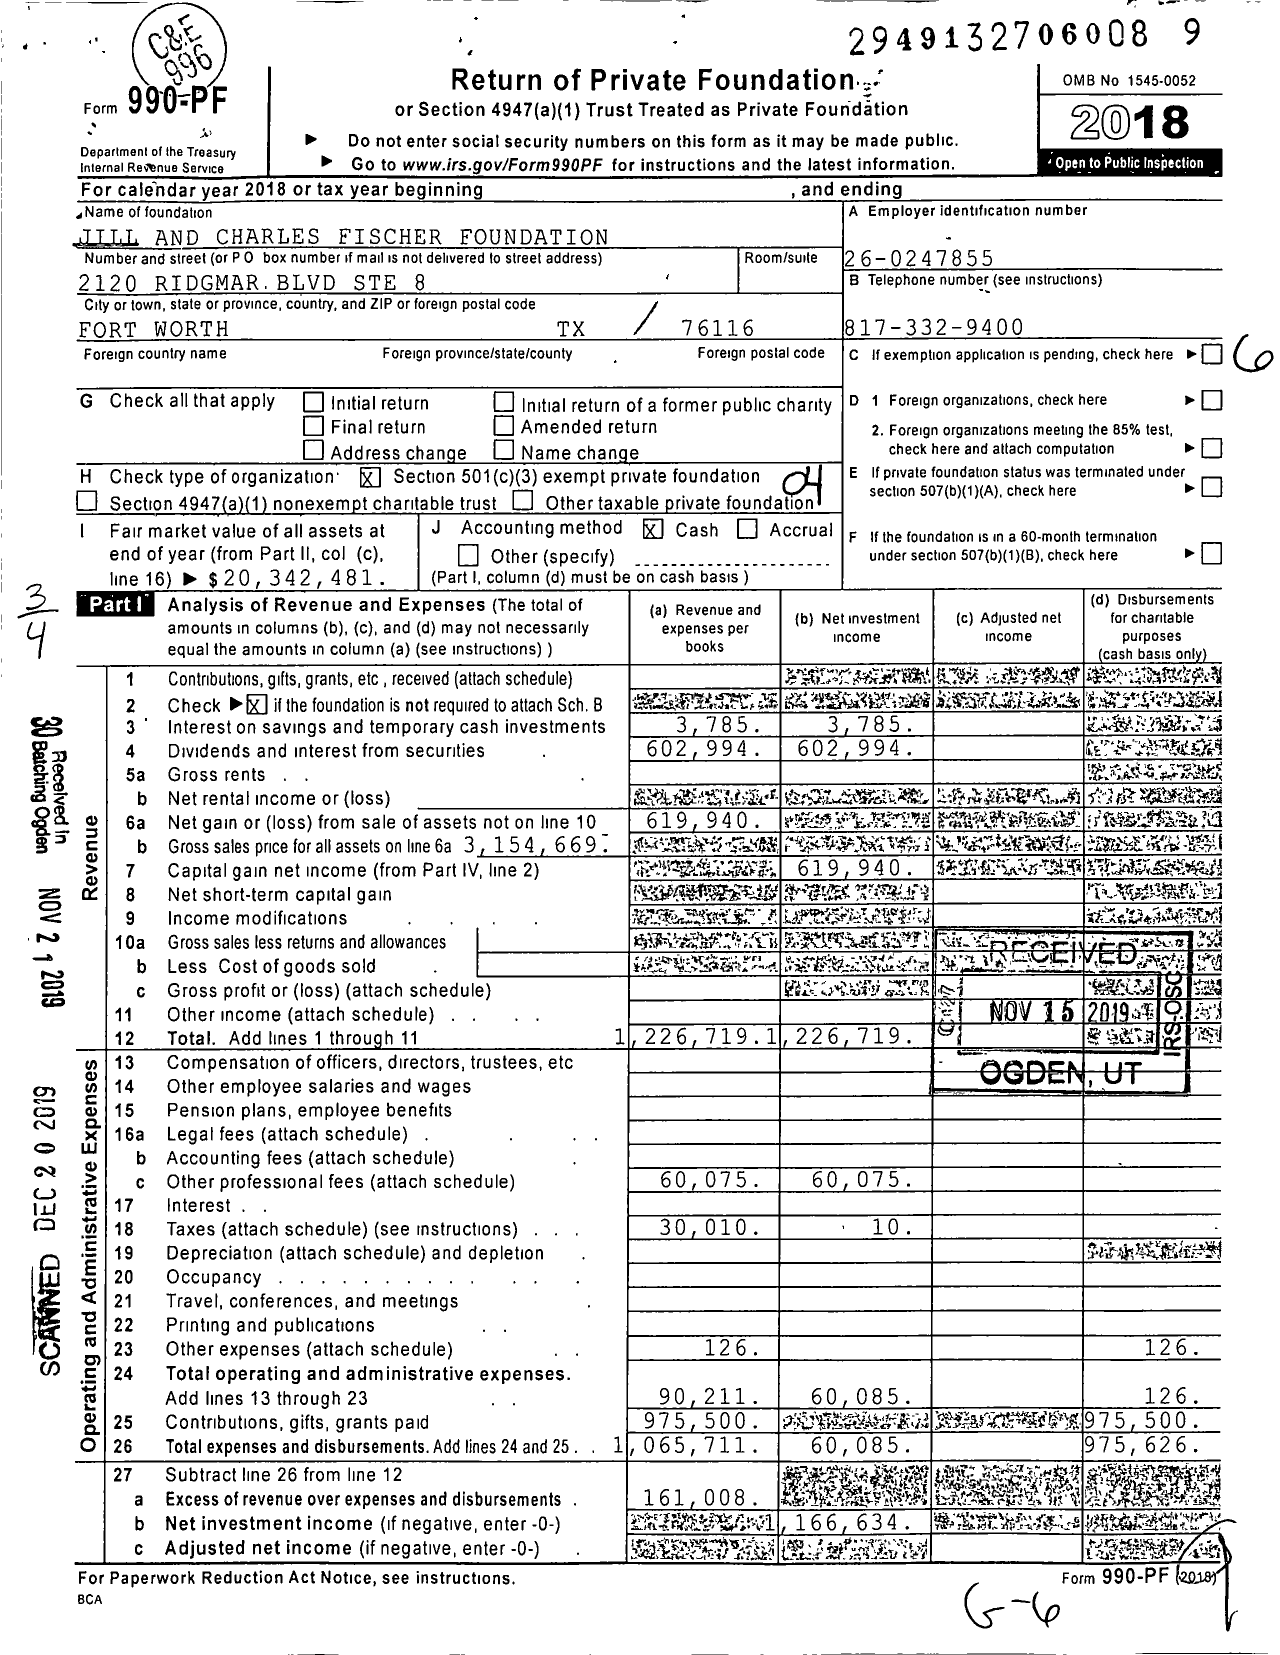 Image of first page of 2018 Form 990PF for Jill and Charles Fischer Foundation